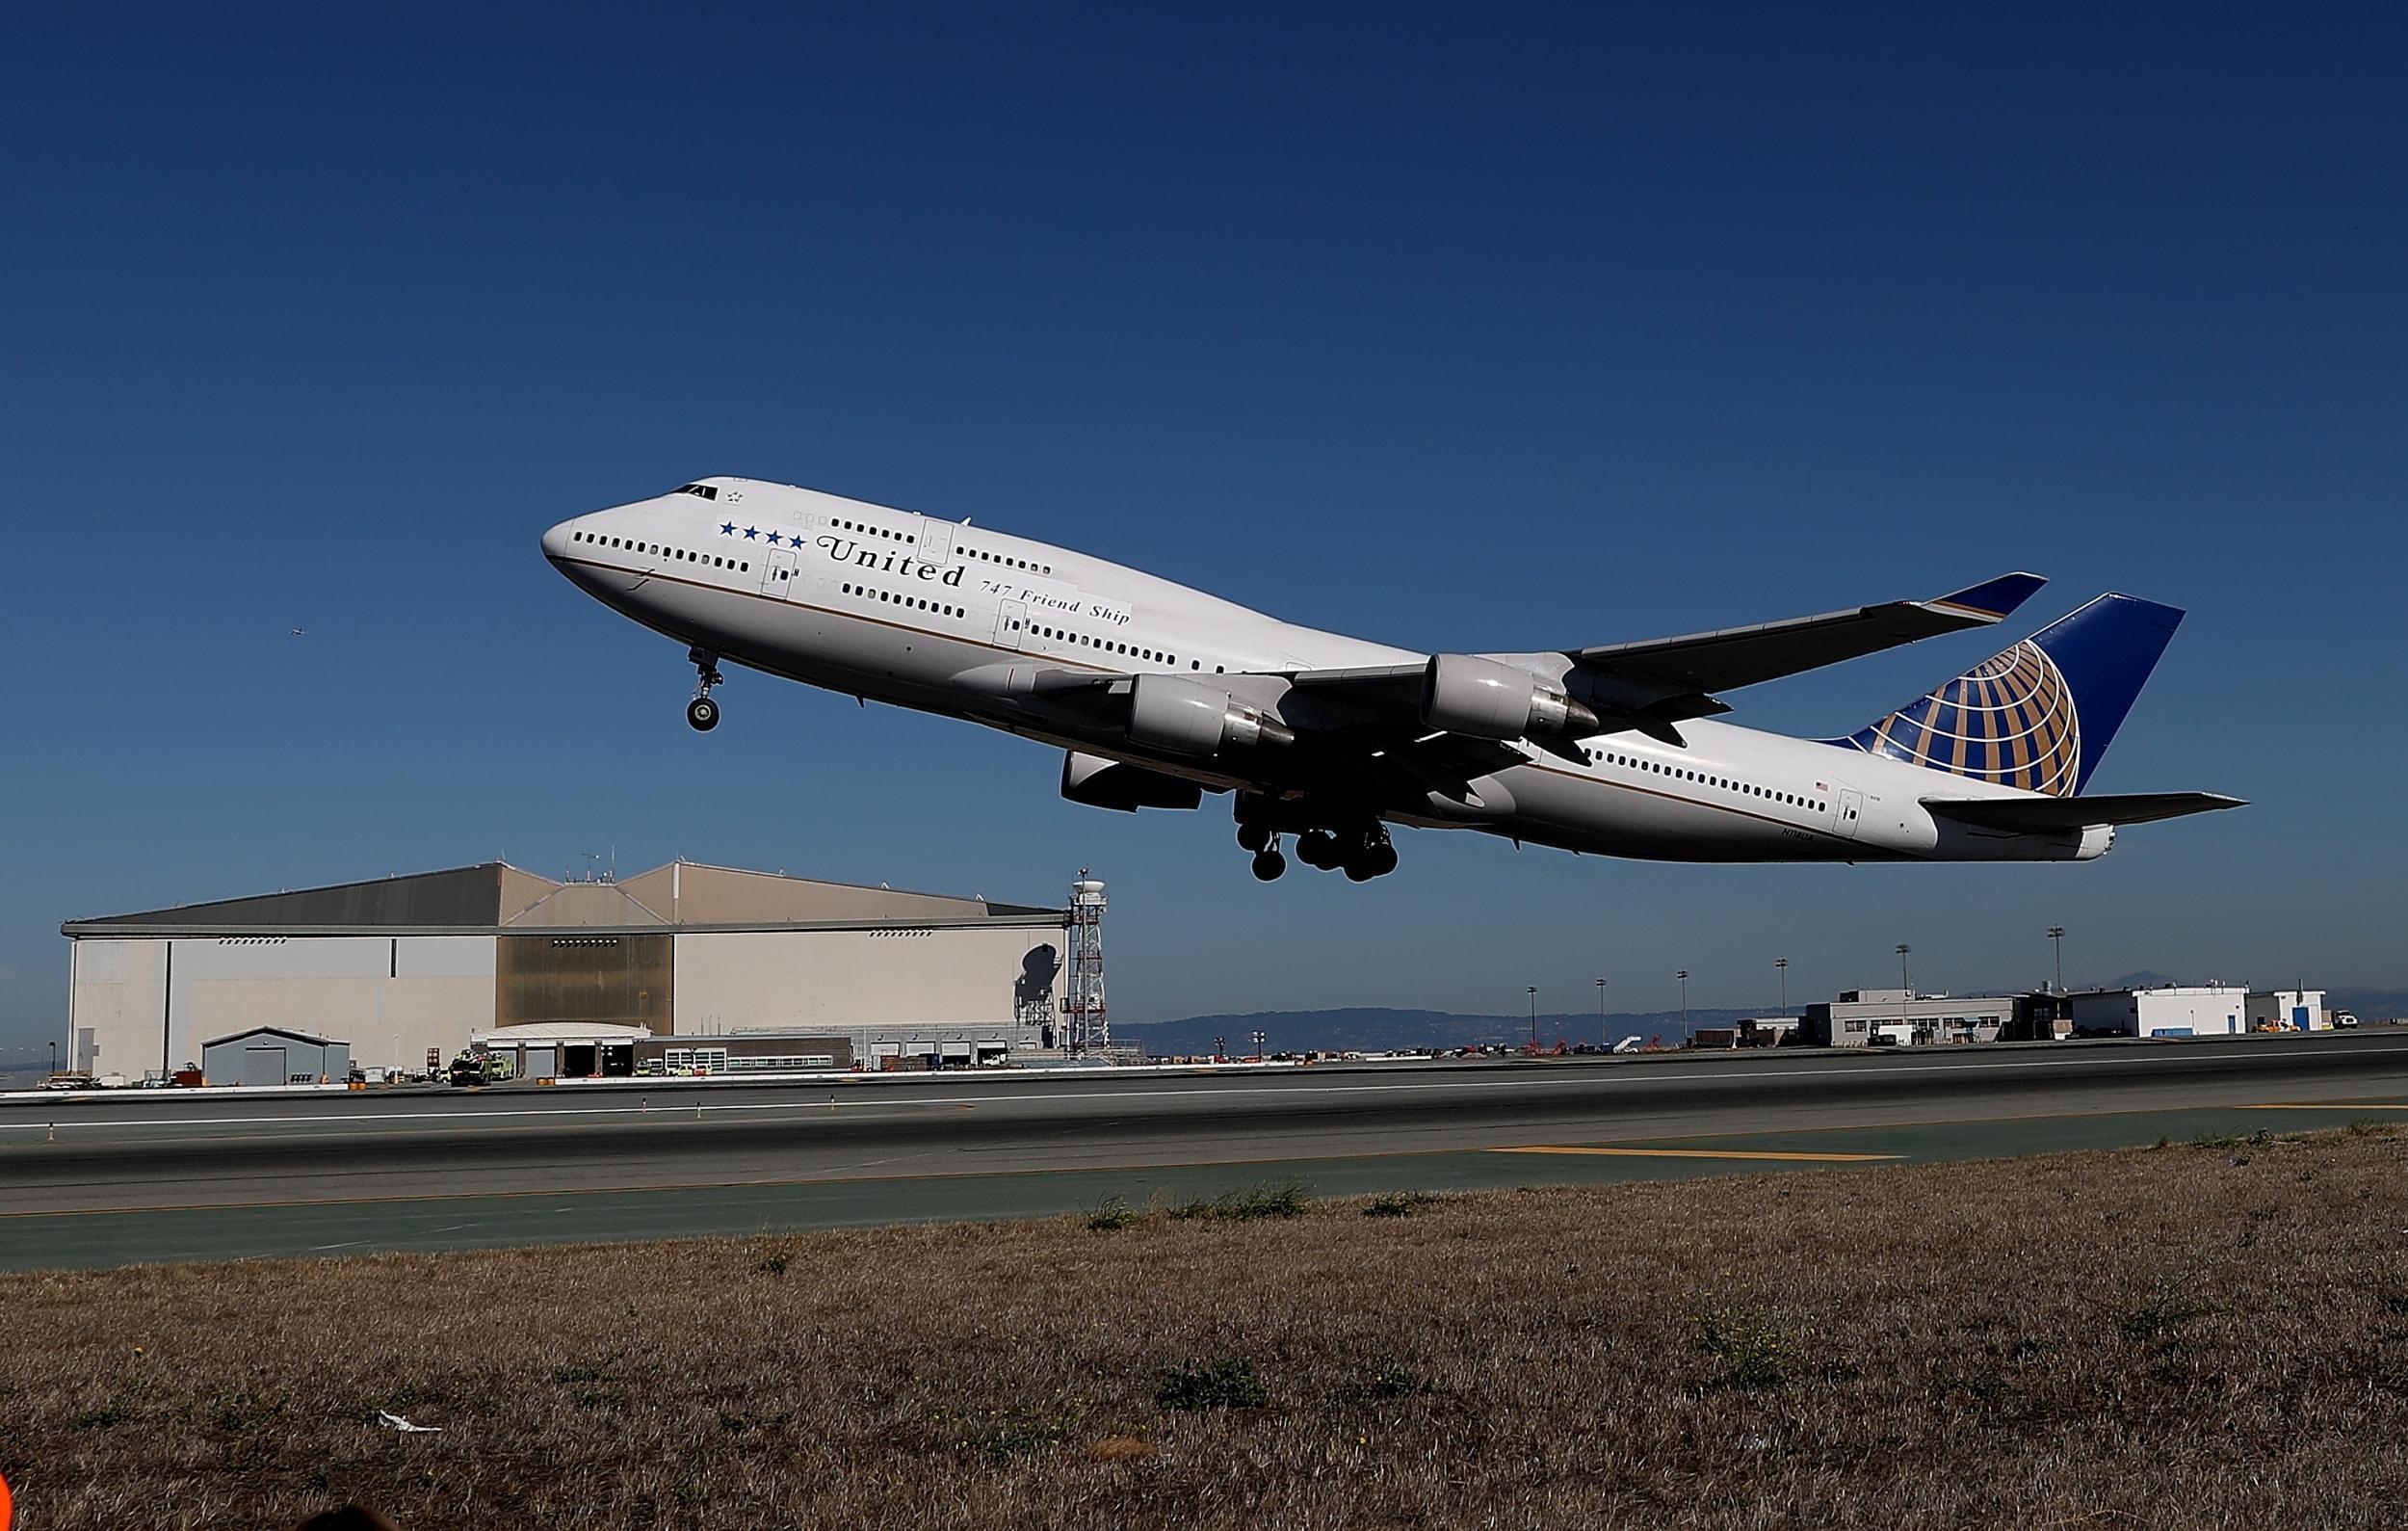 United Airlines flight 747 takes off from San Francisco International Airport